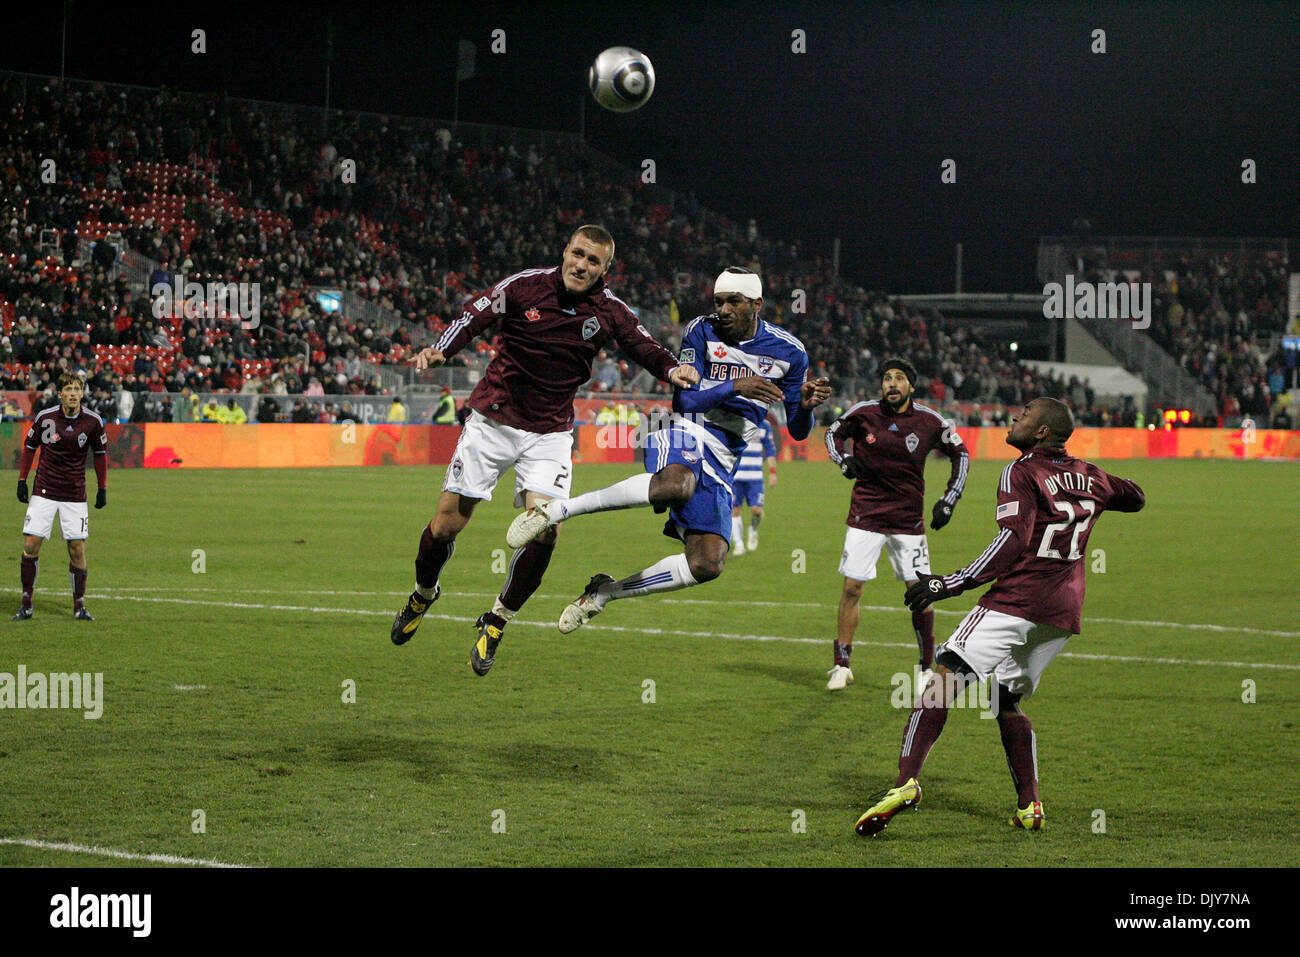 Nov. 21, 2010 - Toronto, Ontario, Canada - Colorado Rapids Defender L (#3) Drew Moore goes for the header against FC Dallas Midfielder R (#18) Marvin Chavez  late in extra-time. The game was played at BMO Field in Toronto, Ontario. The Colorado Rapids defeated FC Dallas 2-1 in extra-time to win the MLS Cup. (Credit Image: © Steve Dormer/Southcreek Global/ZUMAPRESS.com) Stock Photo